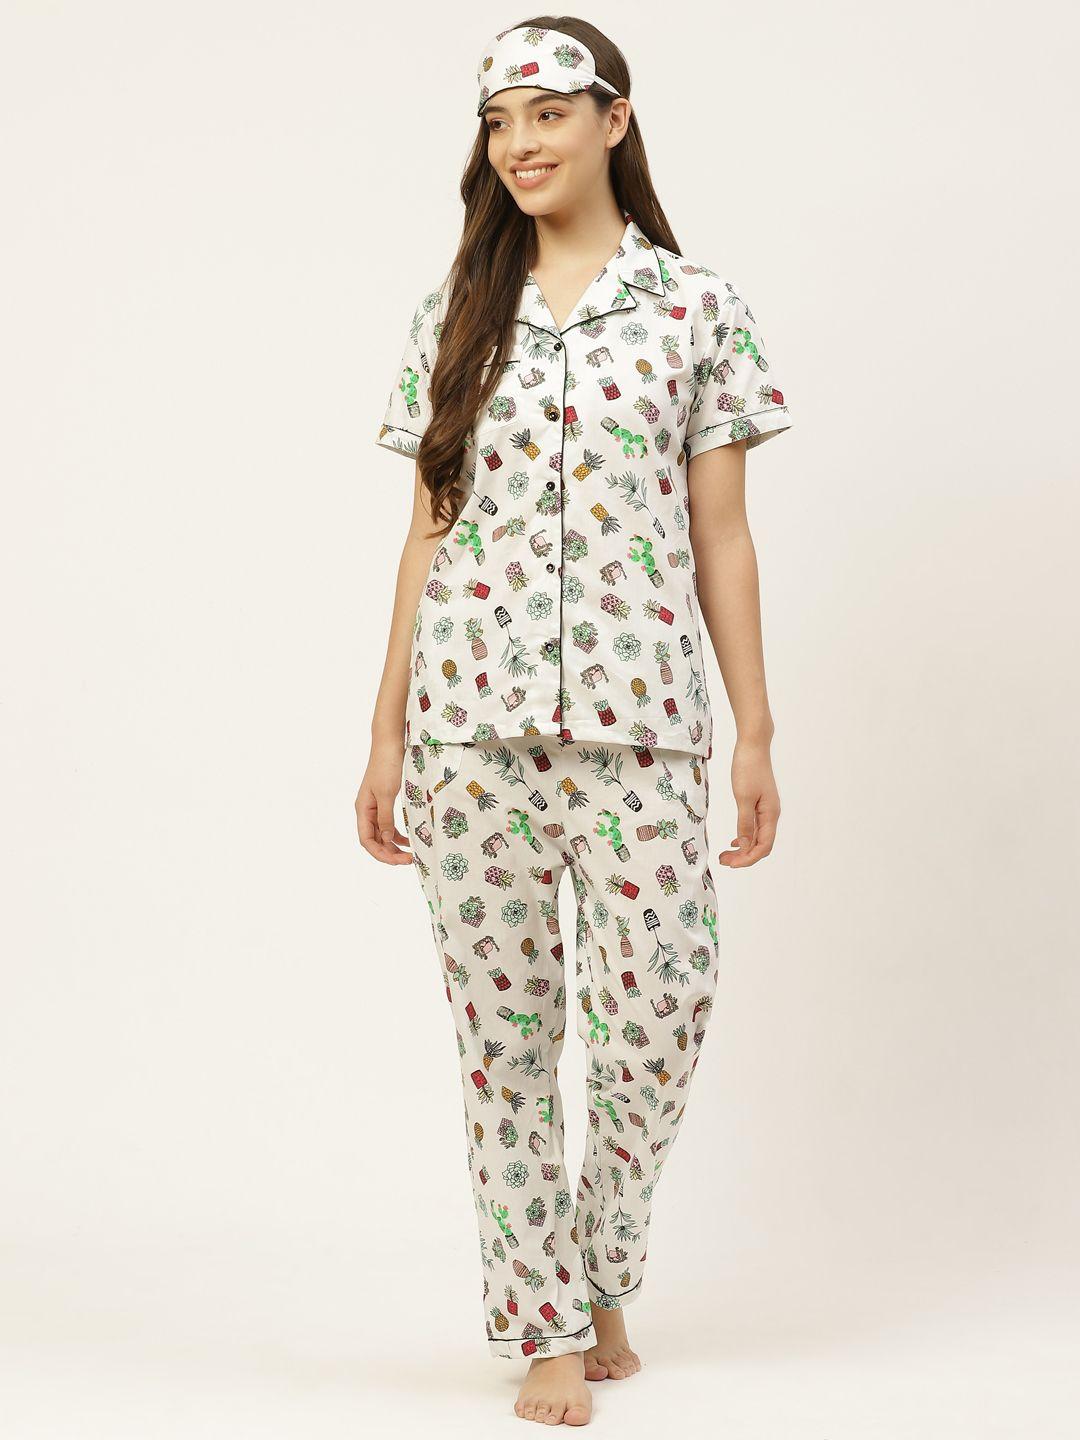 rapra-the-label-women-white-&-black-cotton-quirky-print-night-suit-with-an-eye-mask